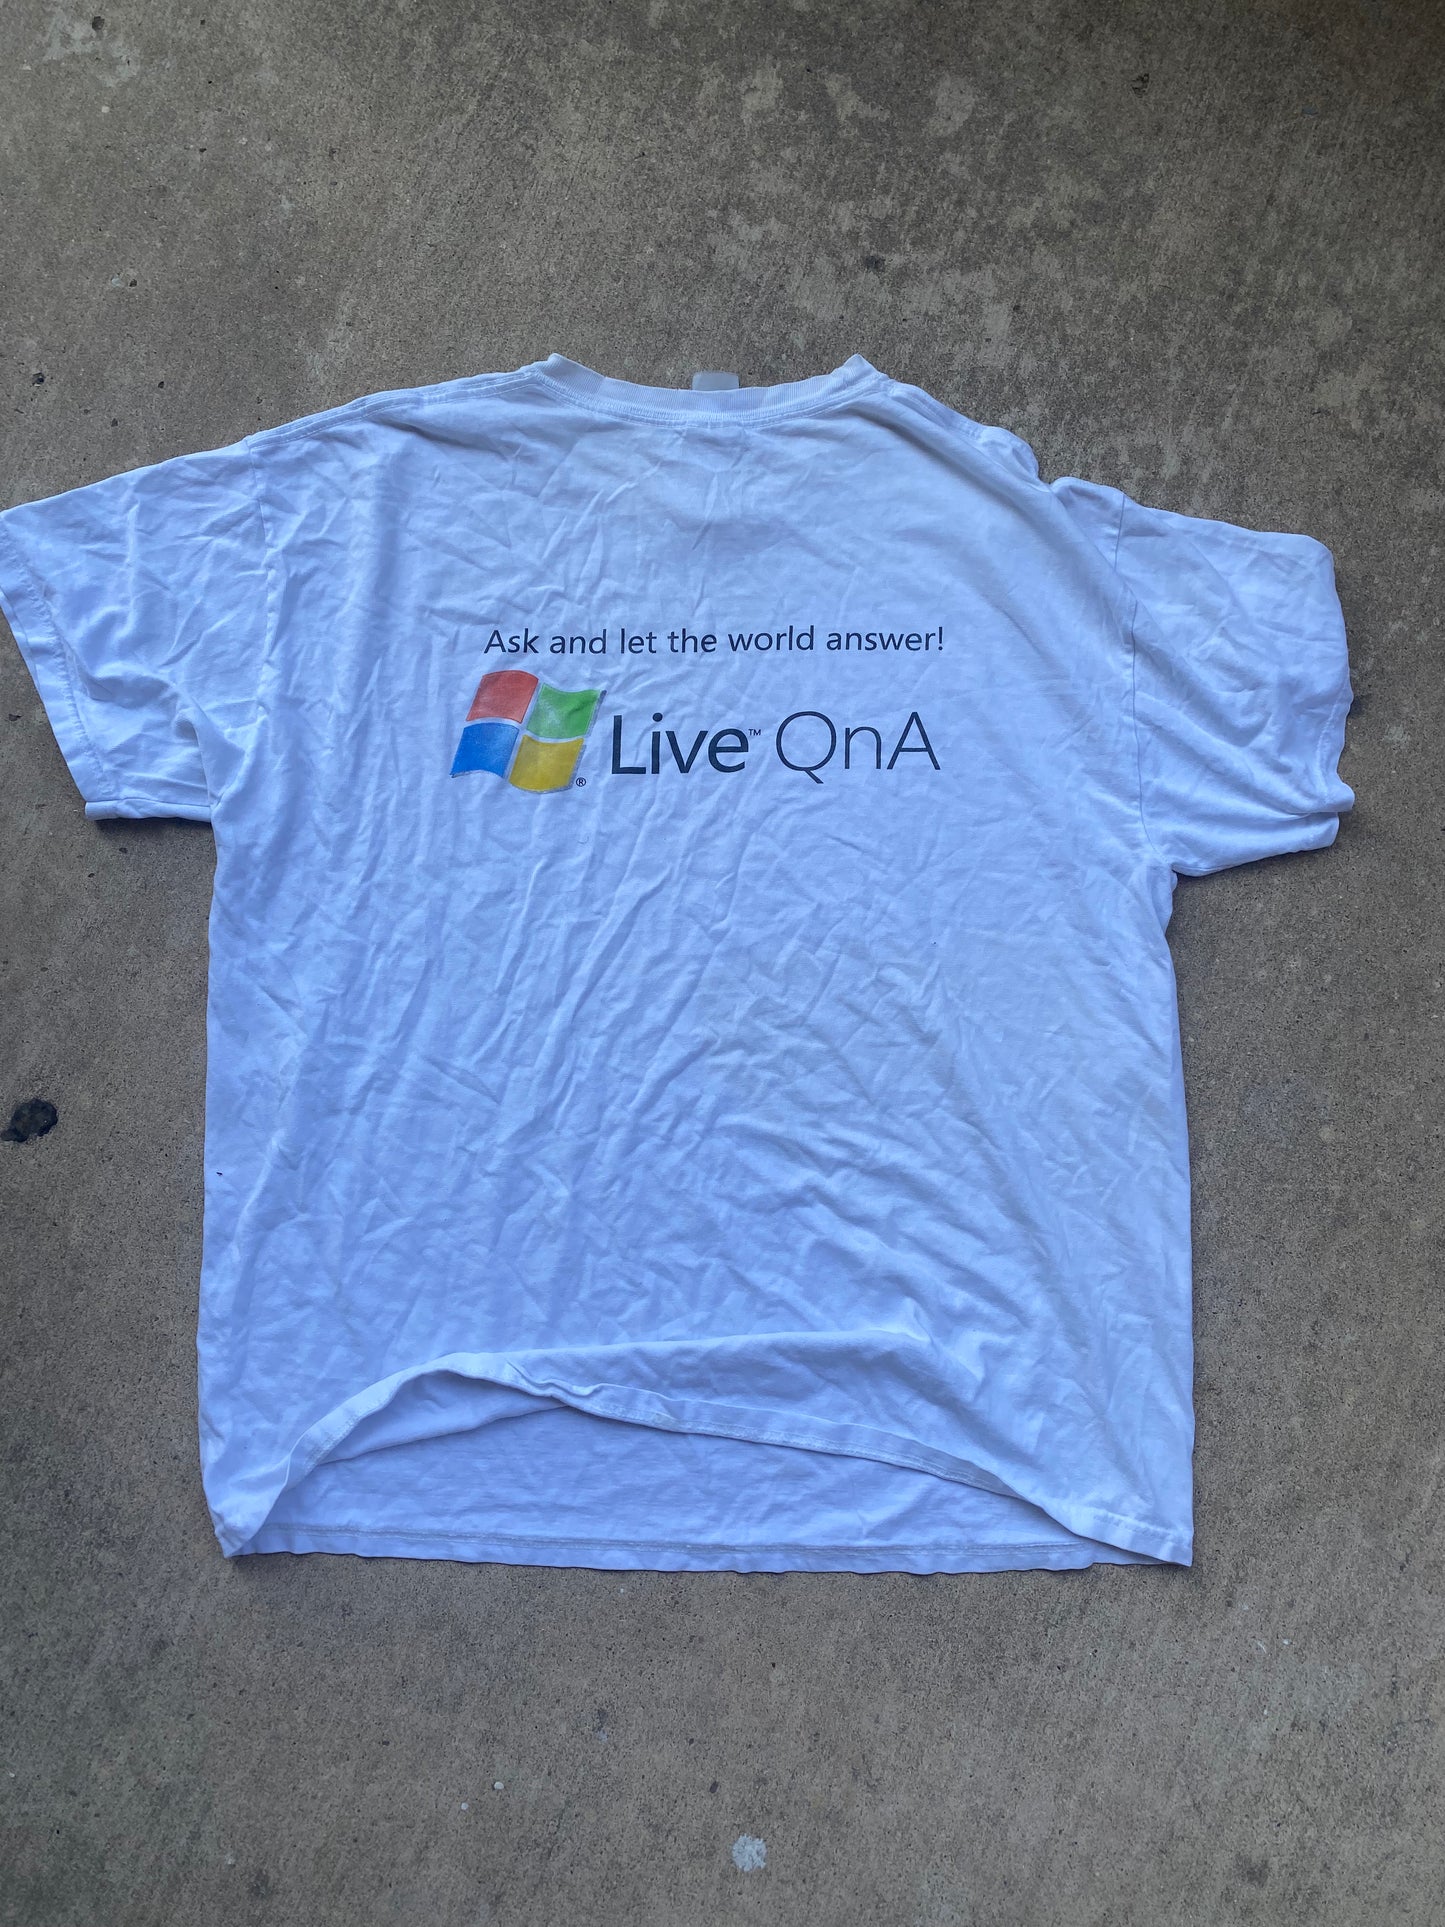 Windows Live Q and A Tee - Brimm Archive Wardrobe Research